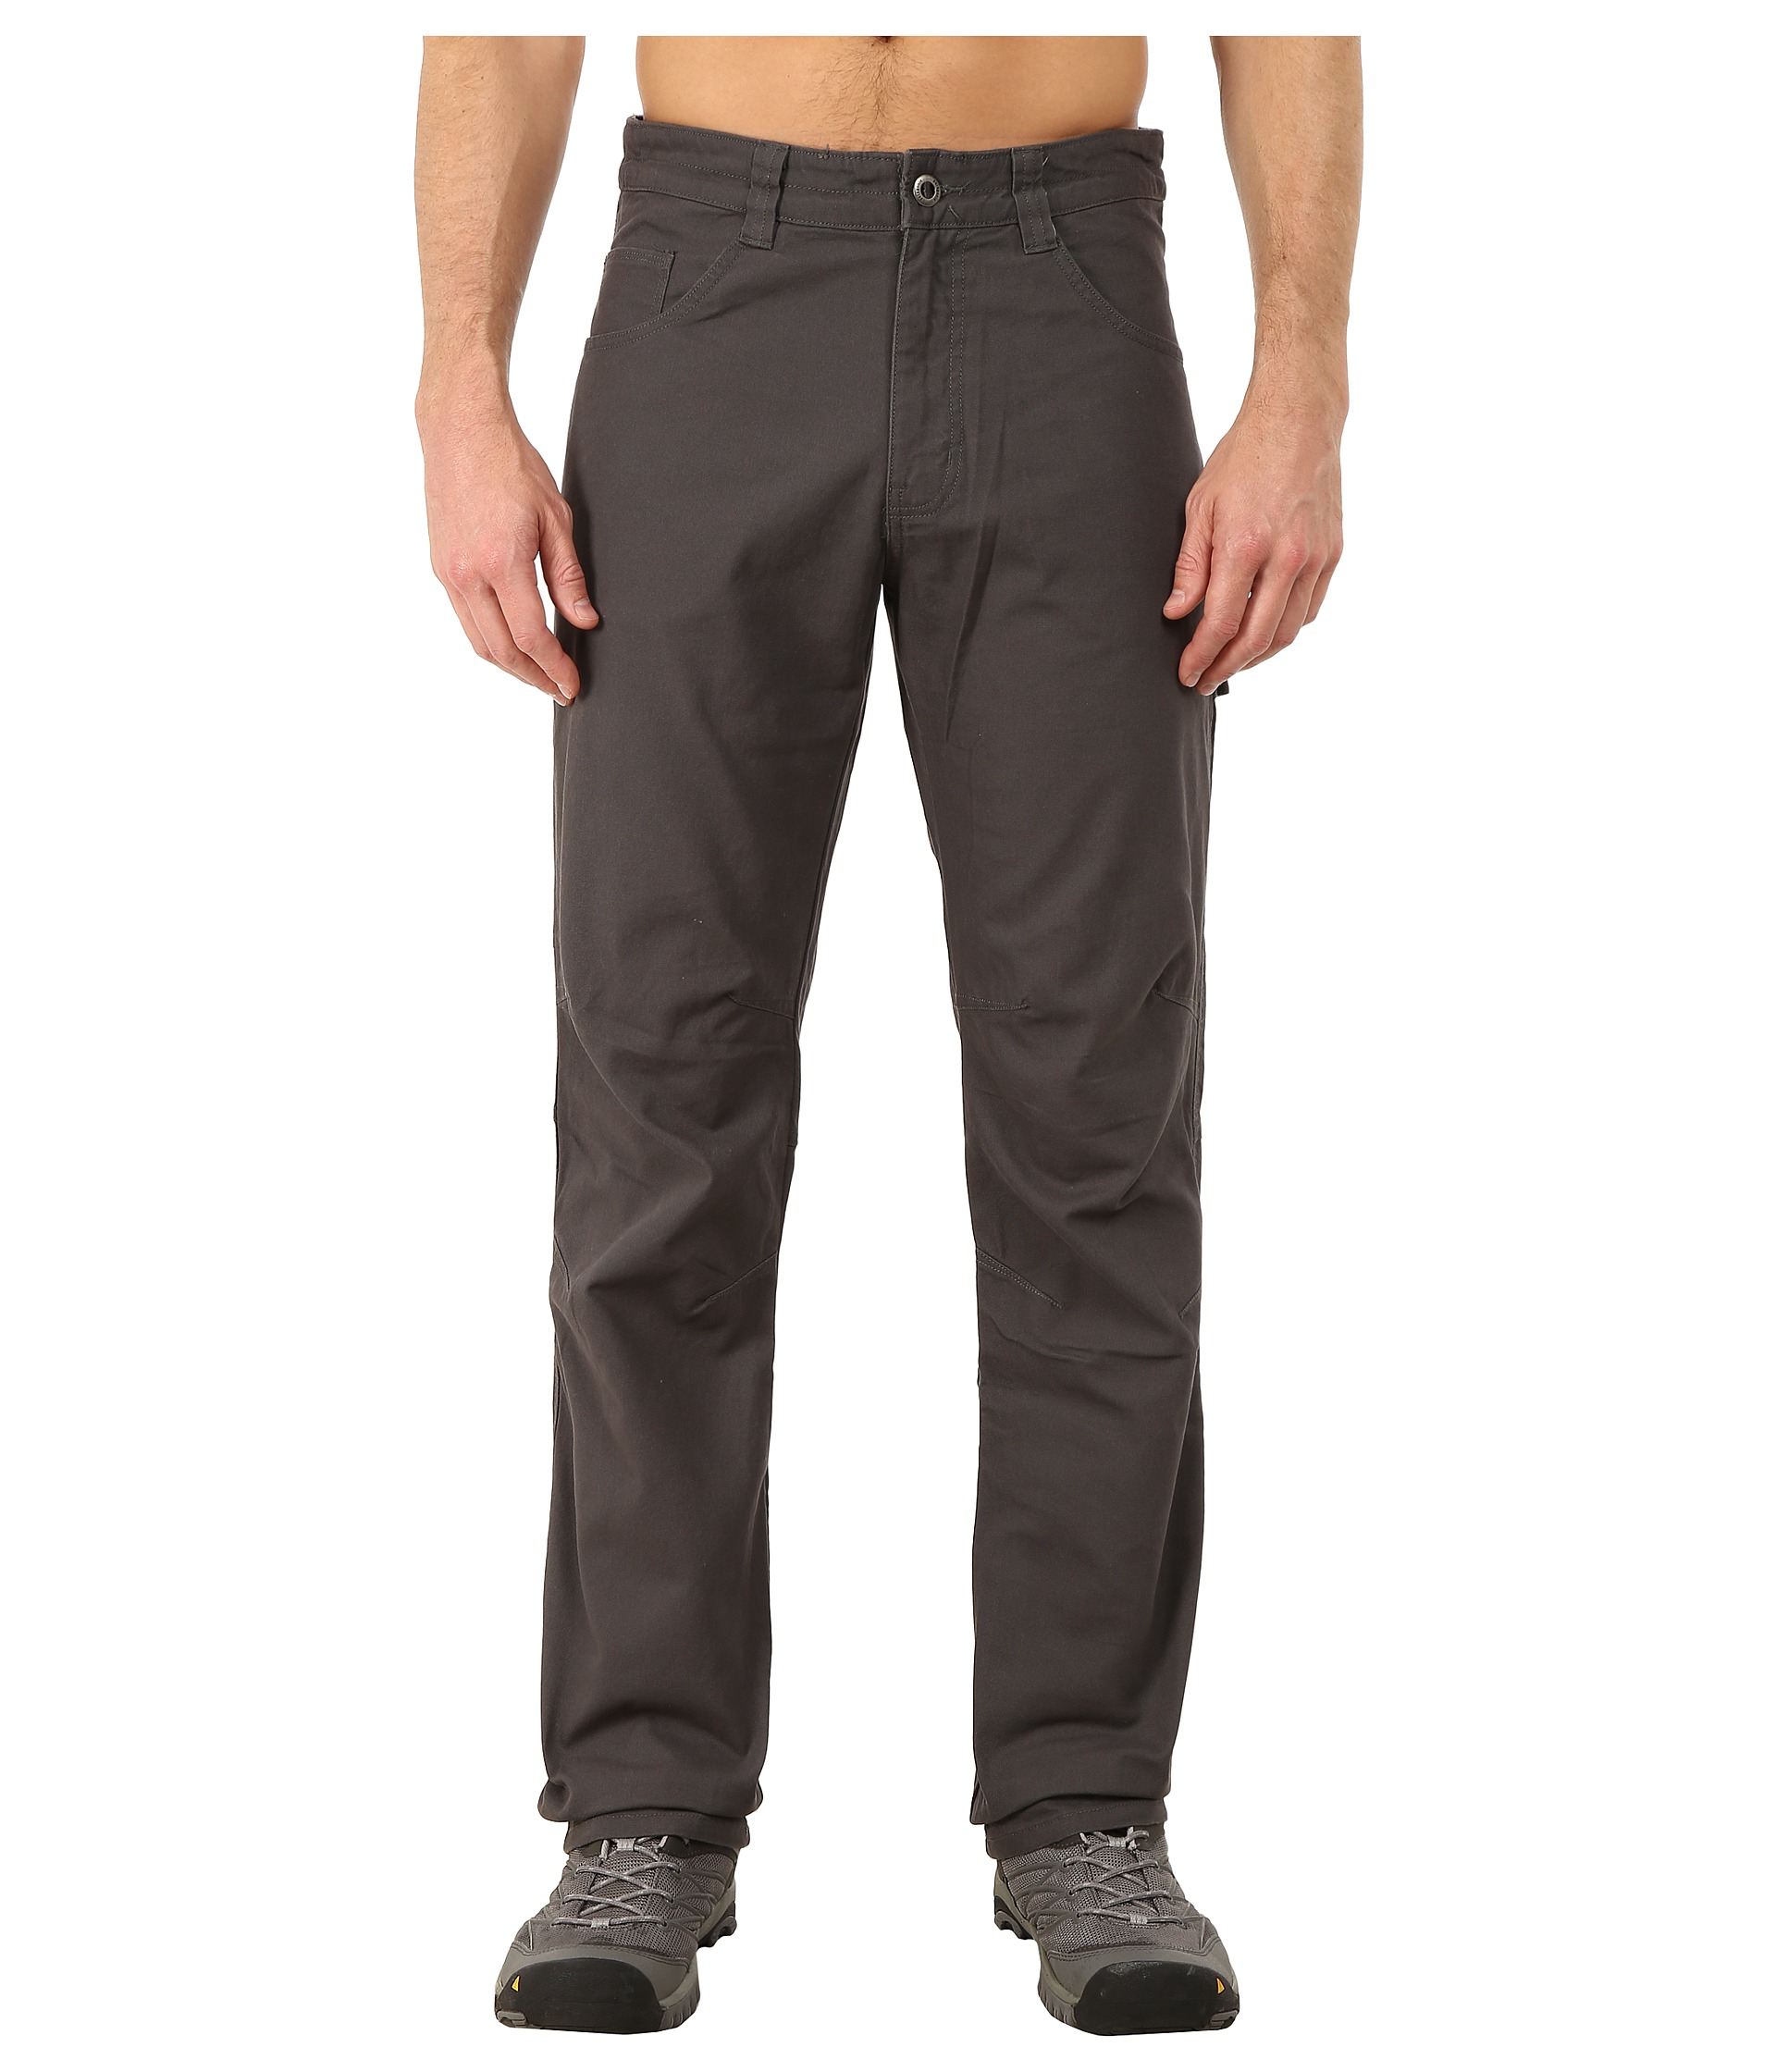 Lyst - Patagonia Utility Duck Pant - Long in Gray for Men